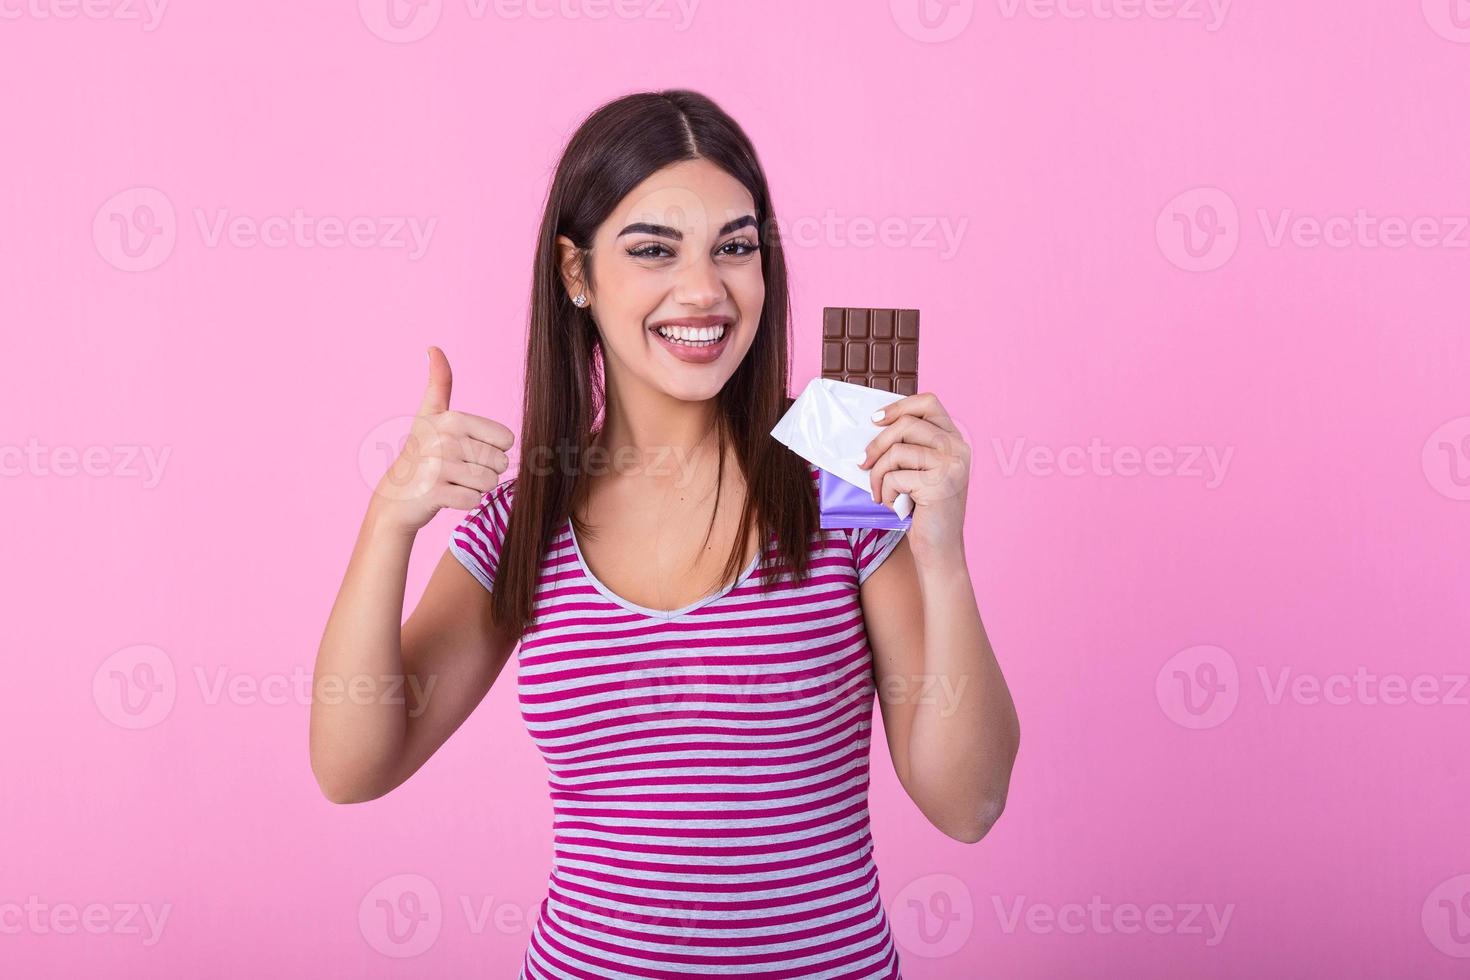 Portrait of a happy young woman with chocolate bar isolated over pink background showing thumbs up. Young woman with natural make up having fun and eating chocolate isolated on pink background photo